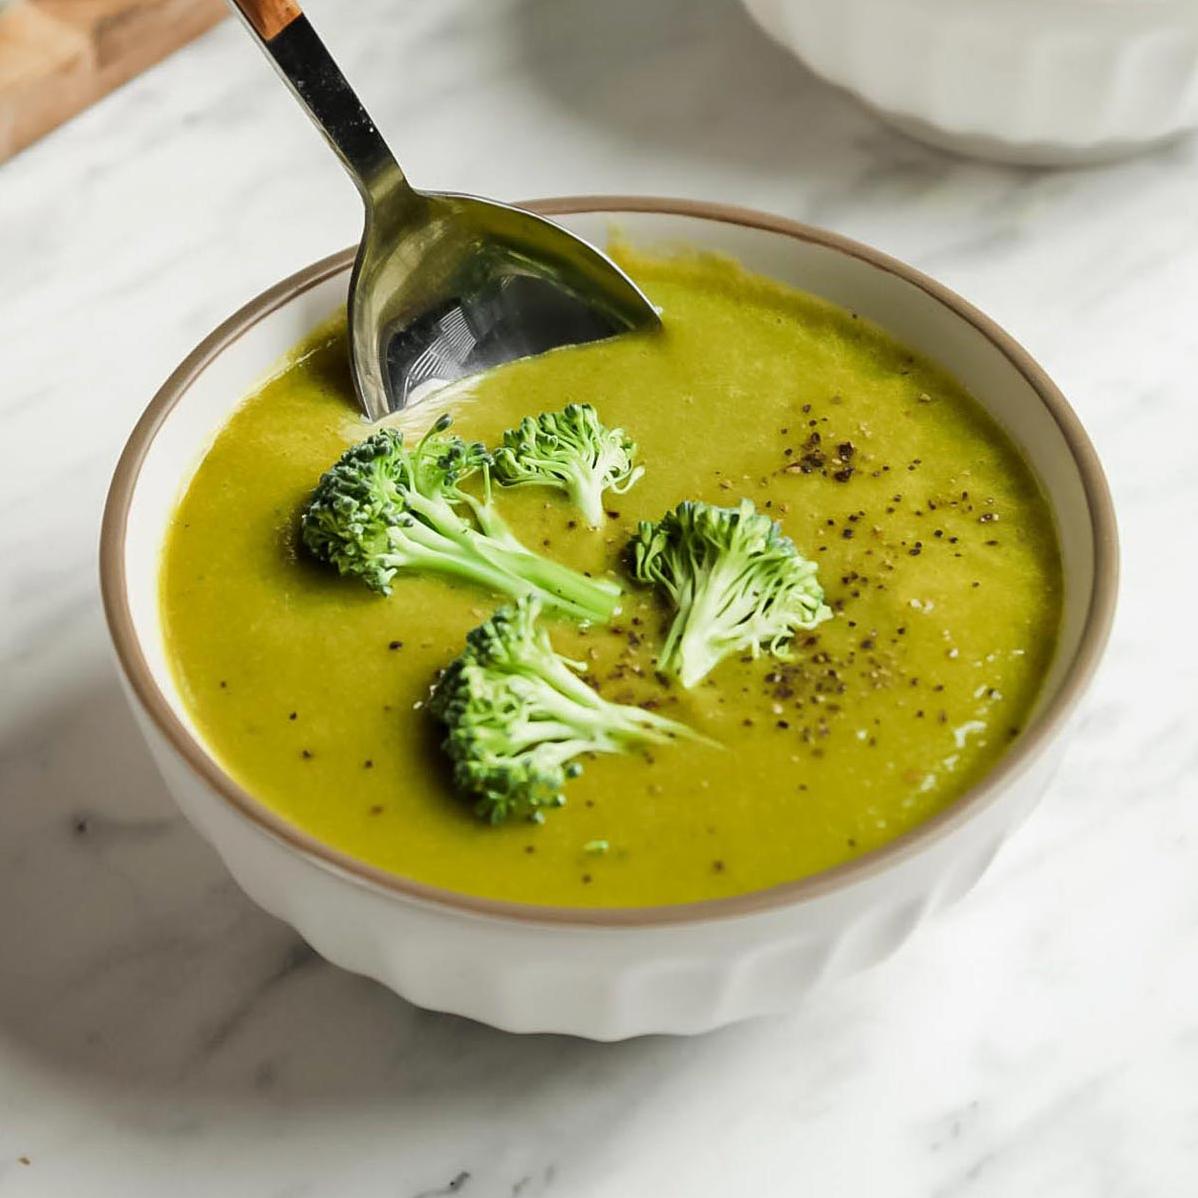  Need some green in your life? This soup's got you covered!